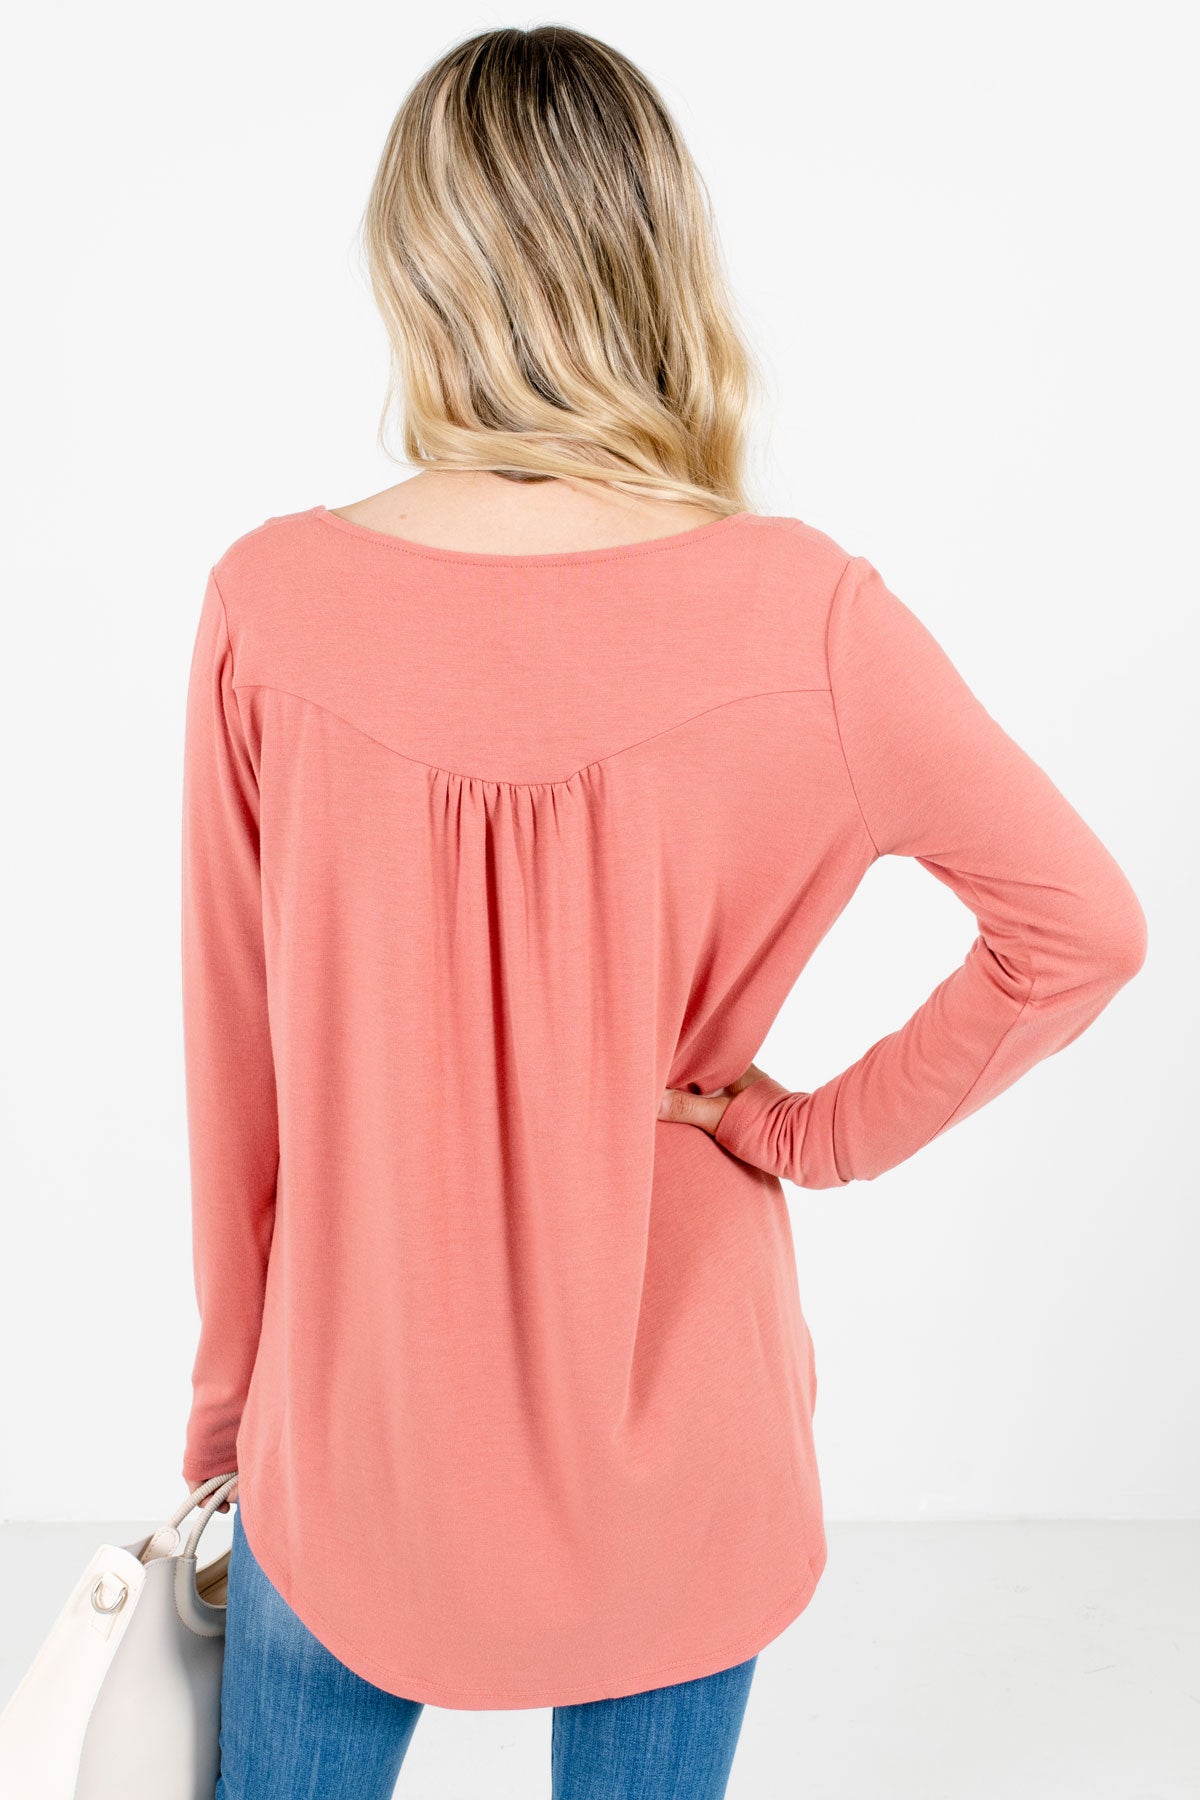 Women's Pink Pleated Accent Boutique Tops